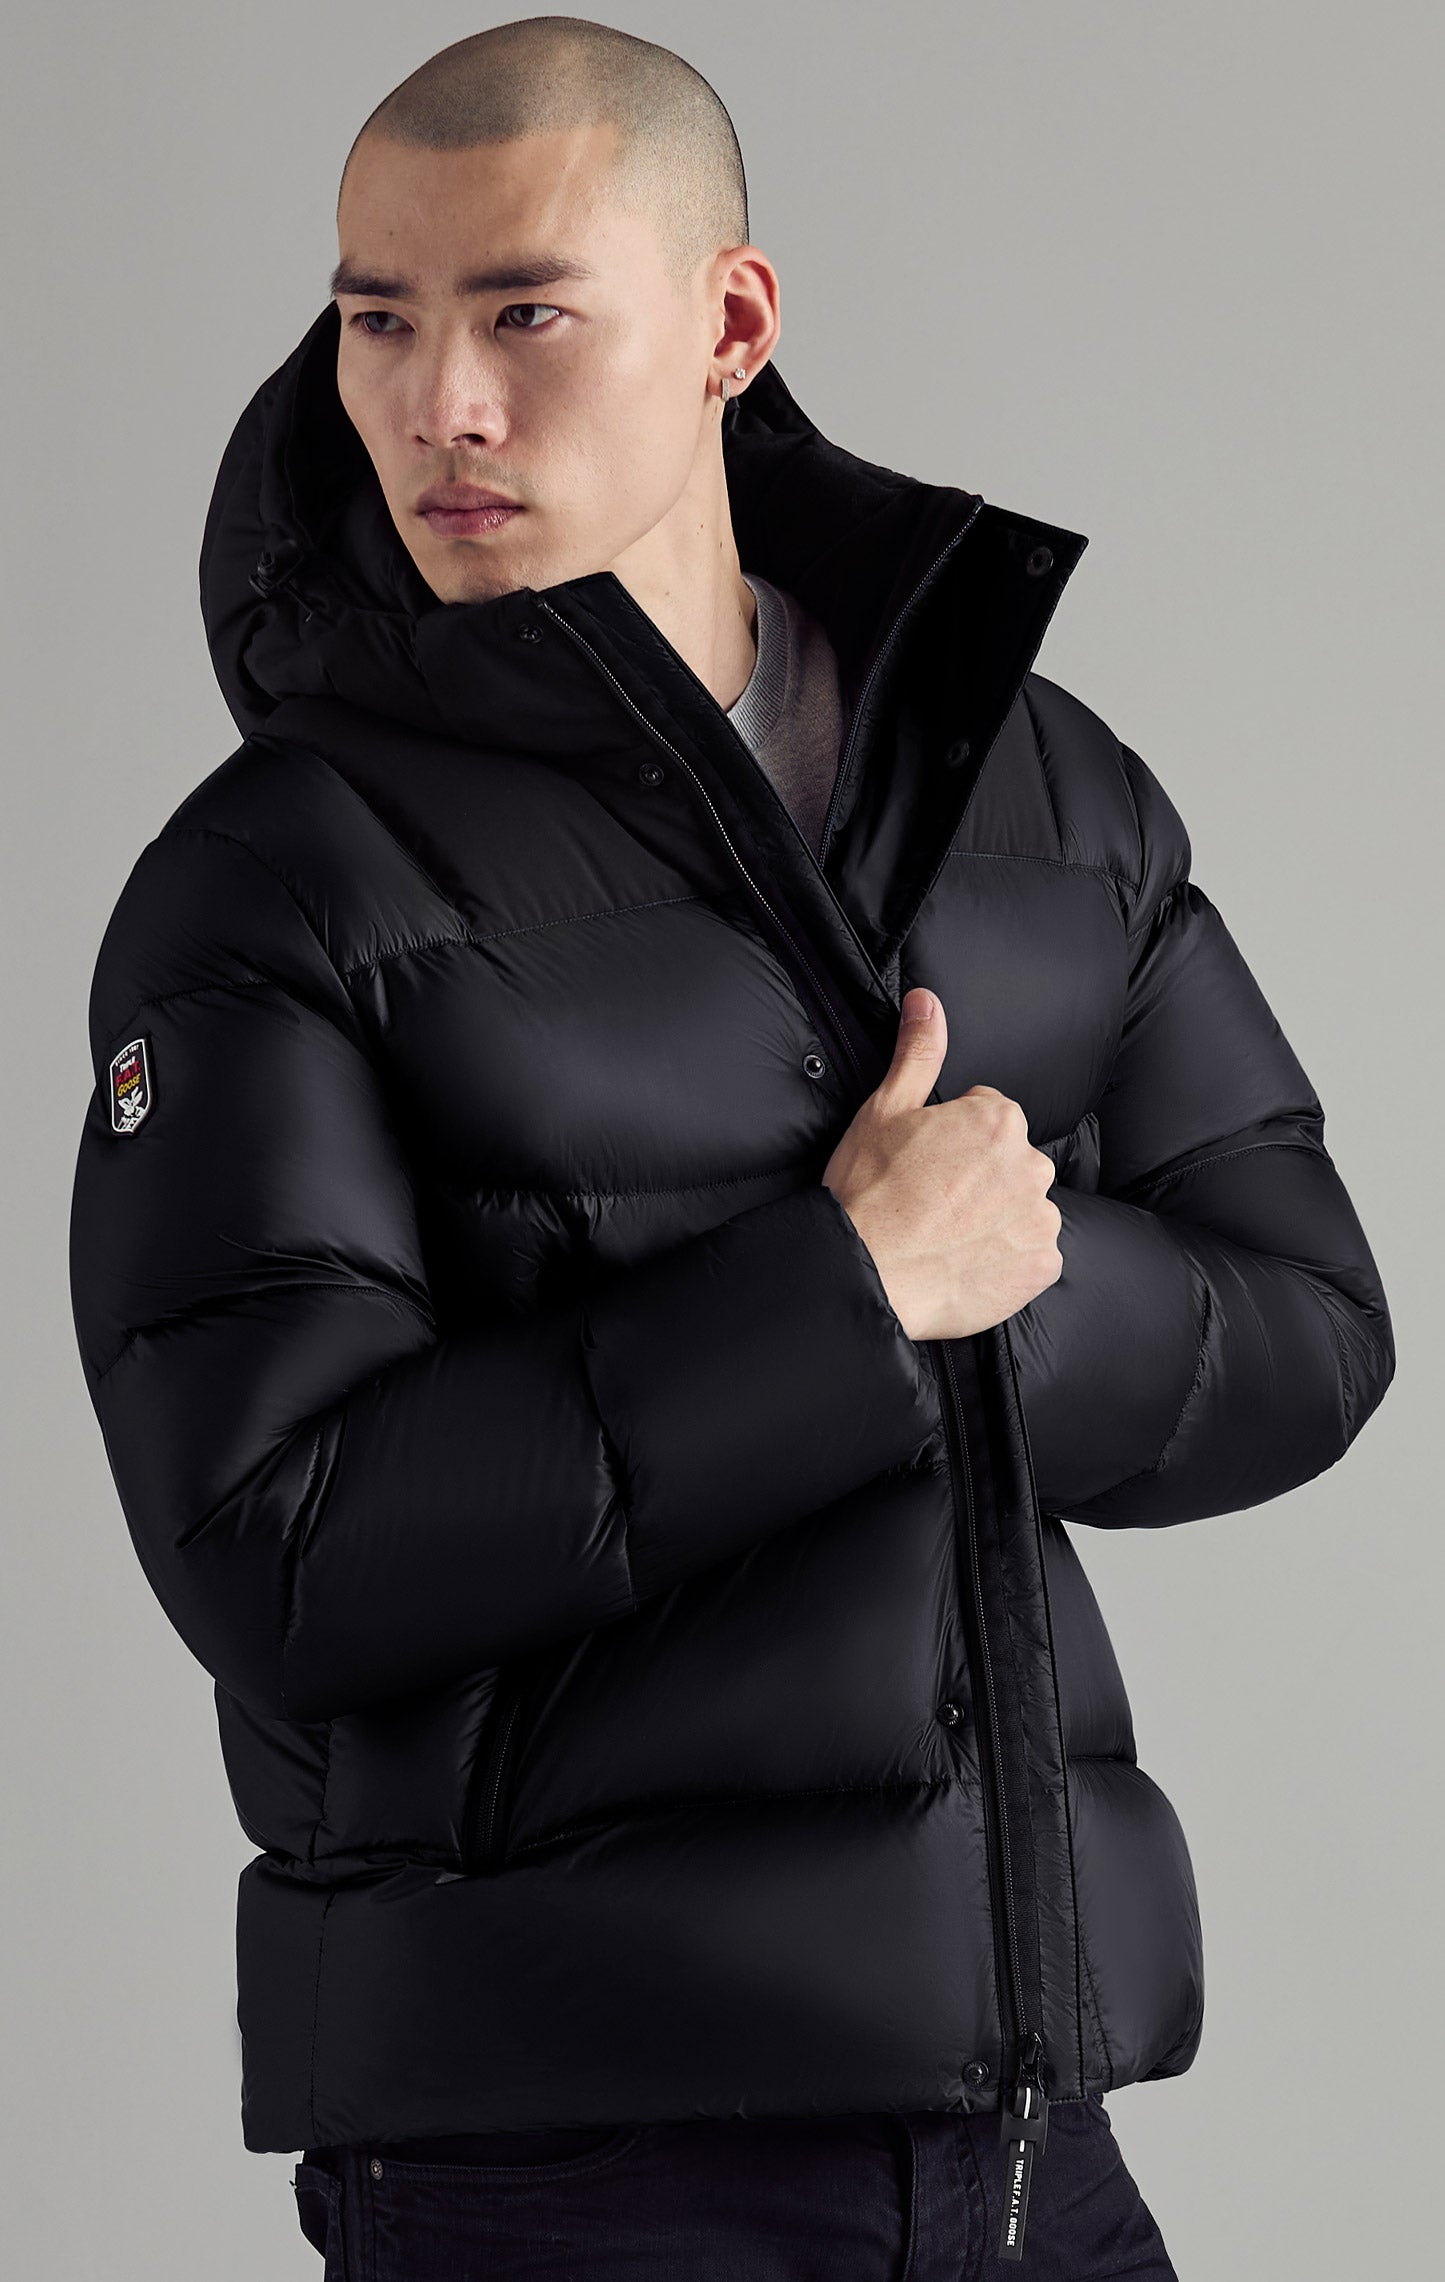 8 Best Down Jackets of 2022